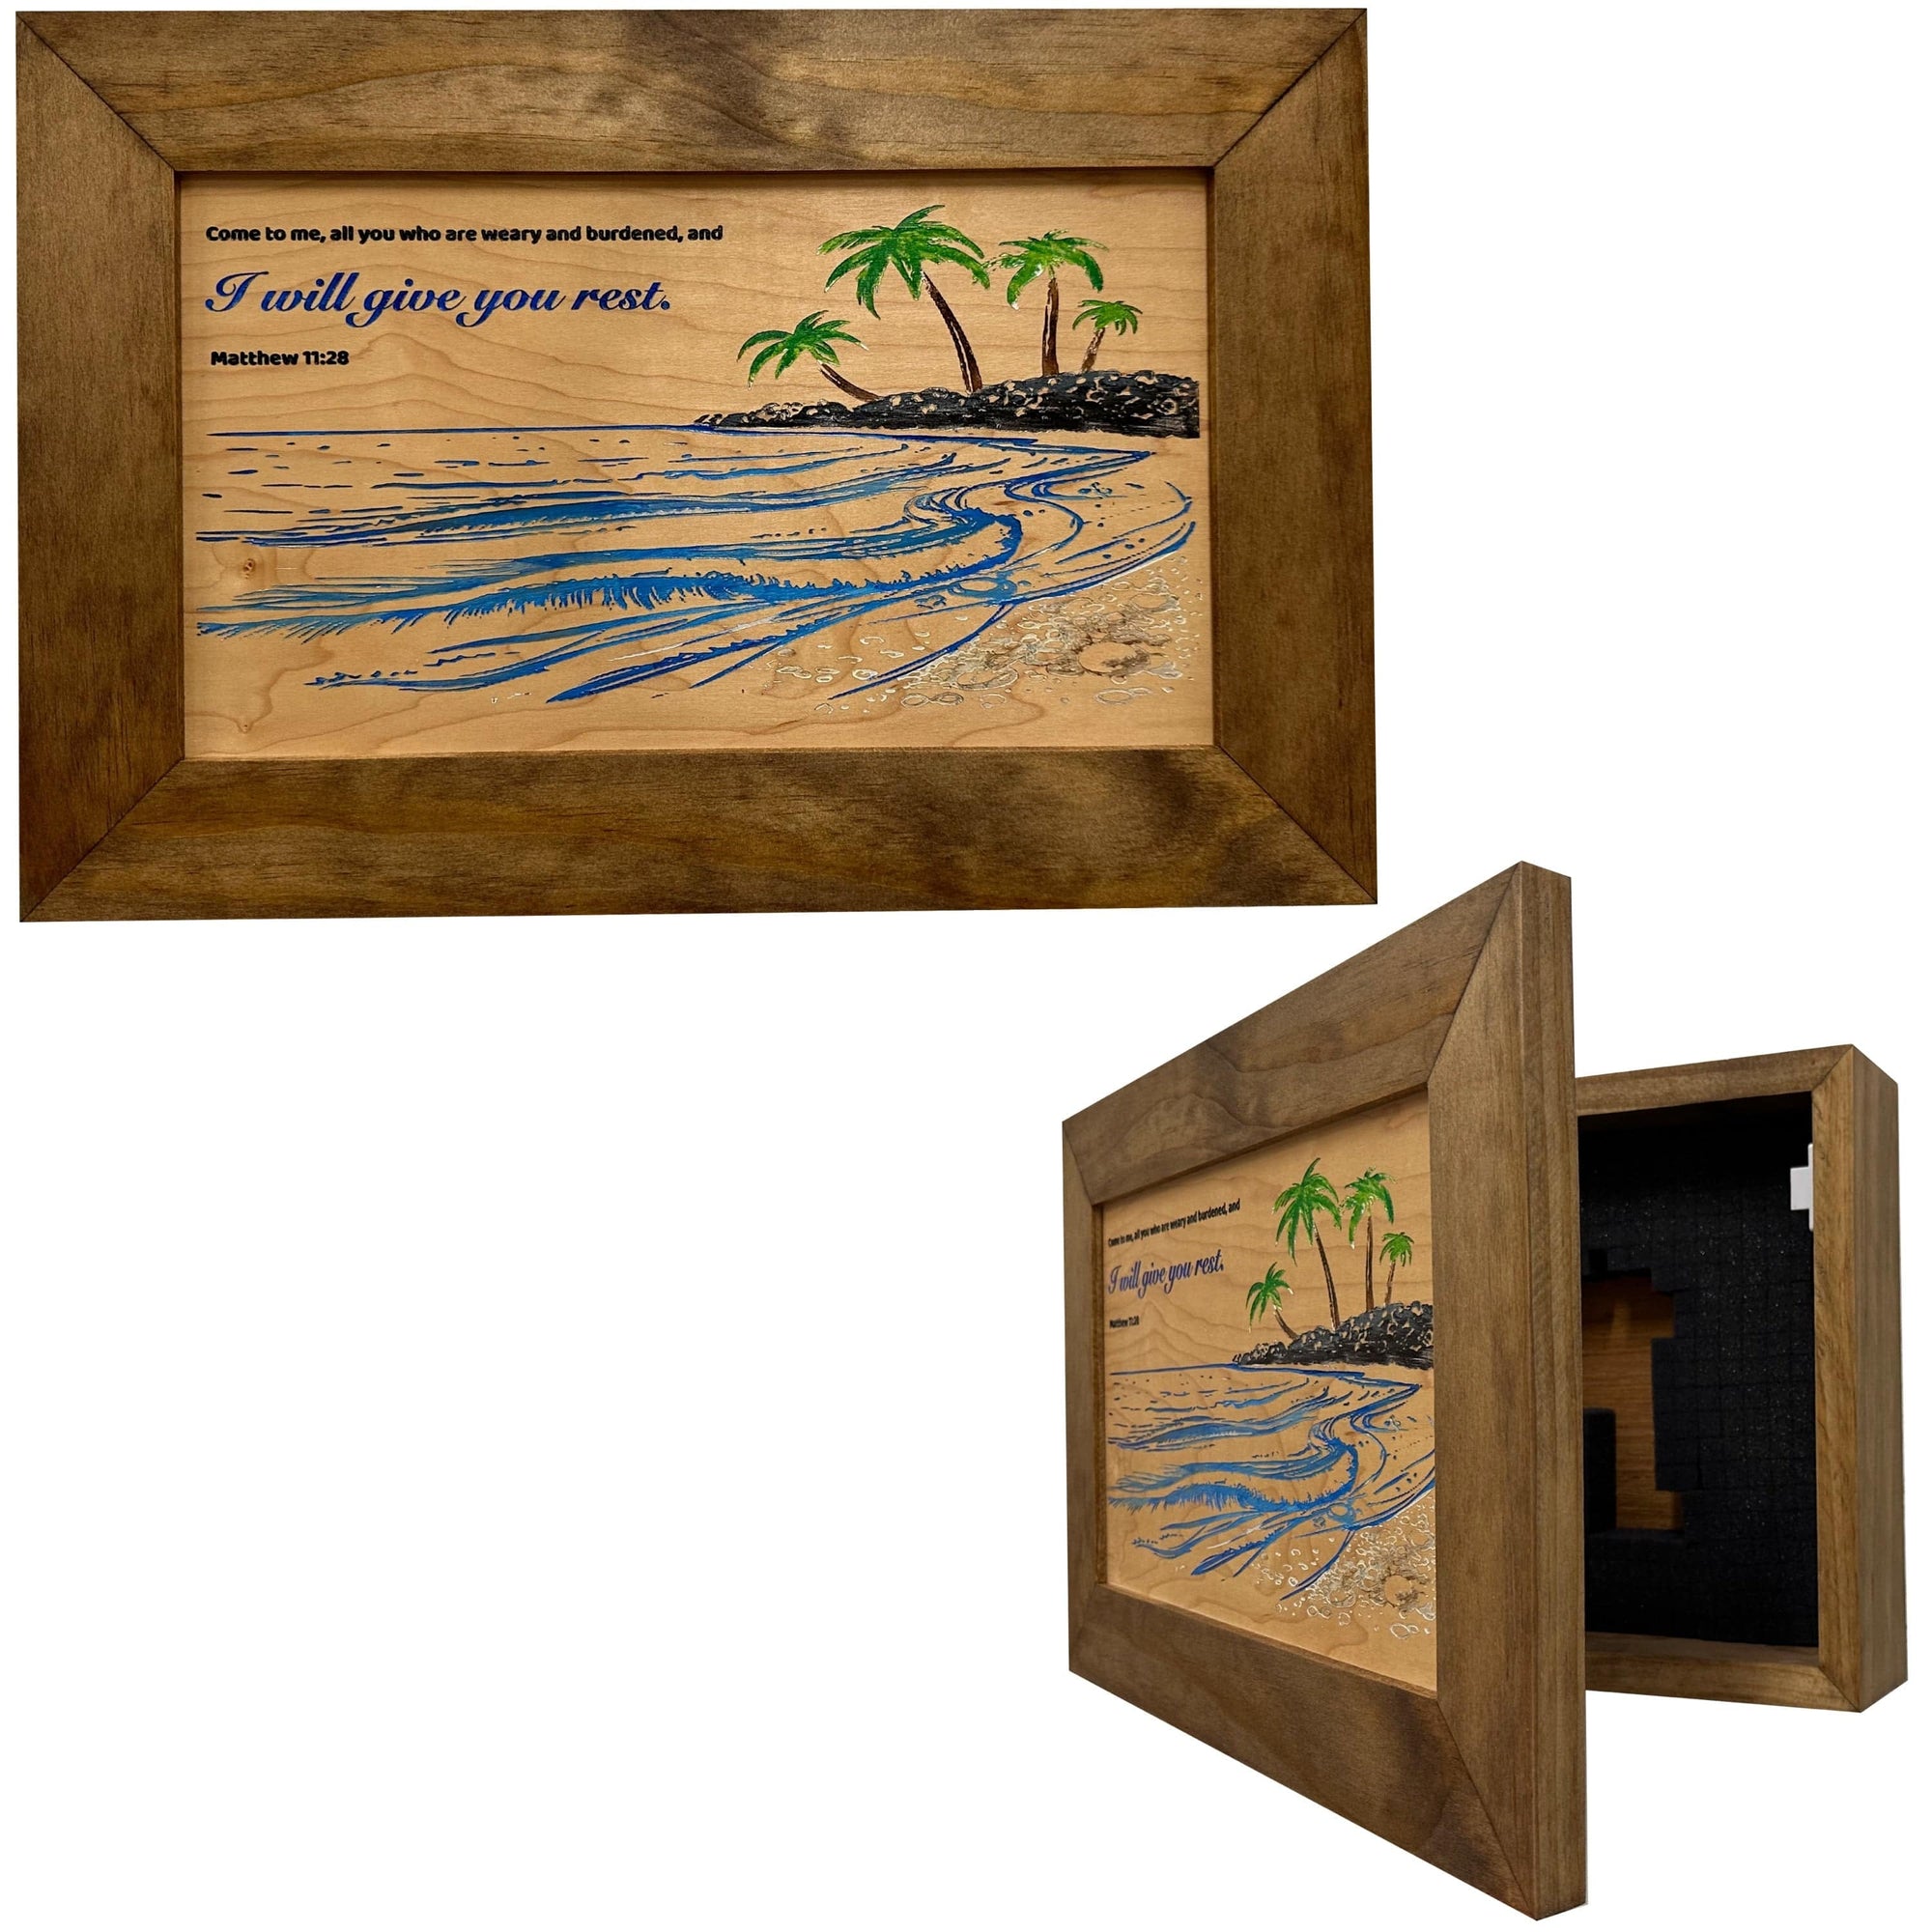 Bible Verse Decorative & Secure Wall-Mounted Gun Cabinet - Matthew 11:28 and Coastal Scene Armadillo Safe and Vault